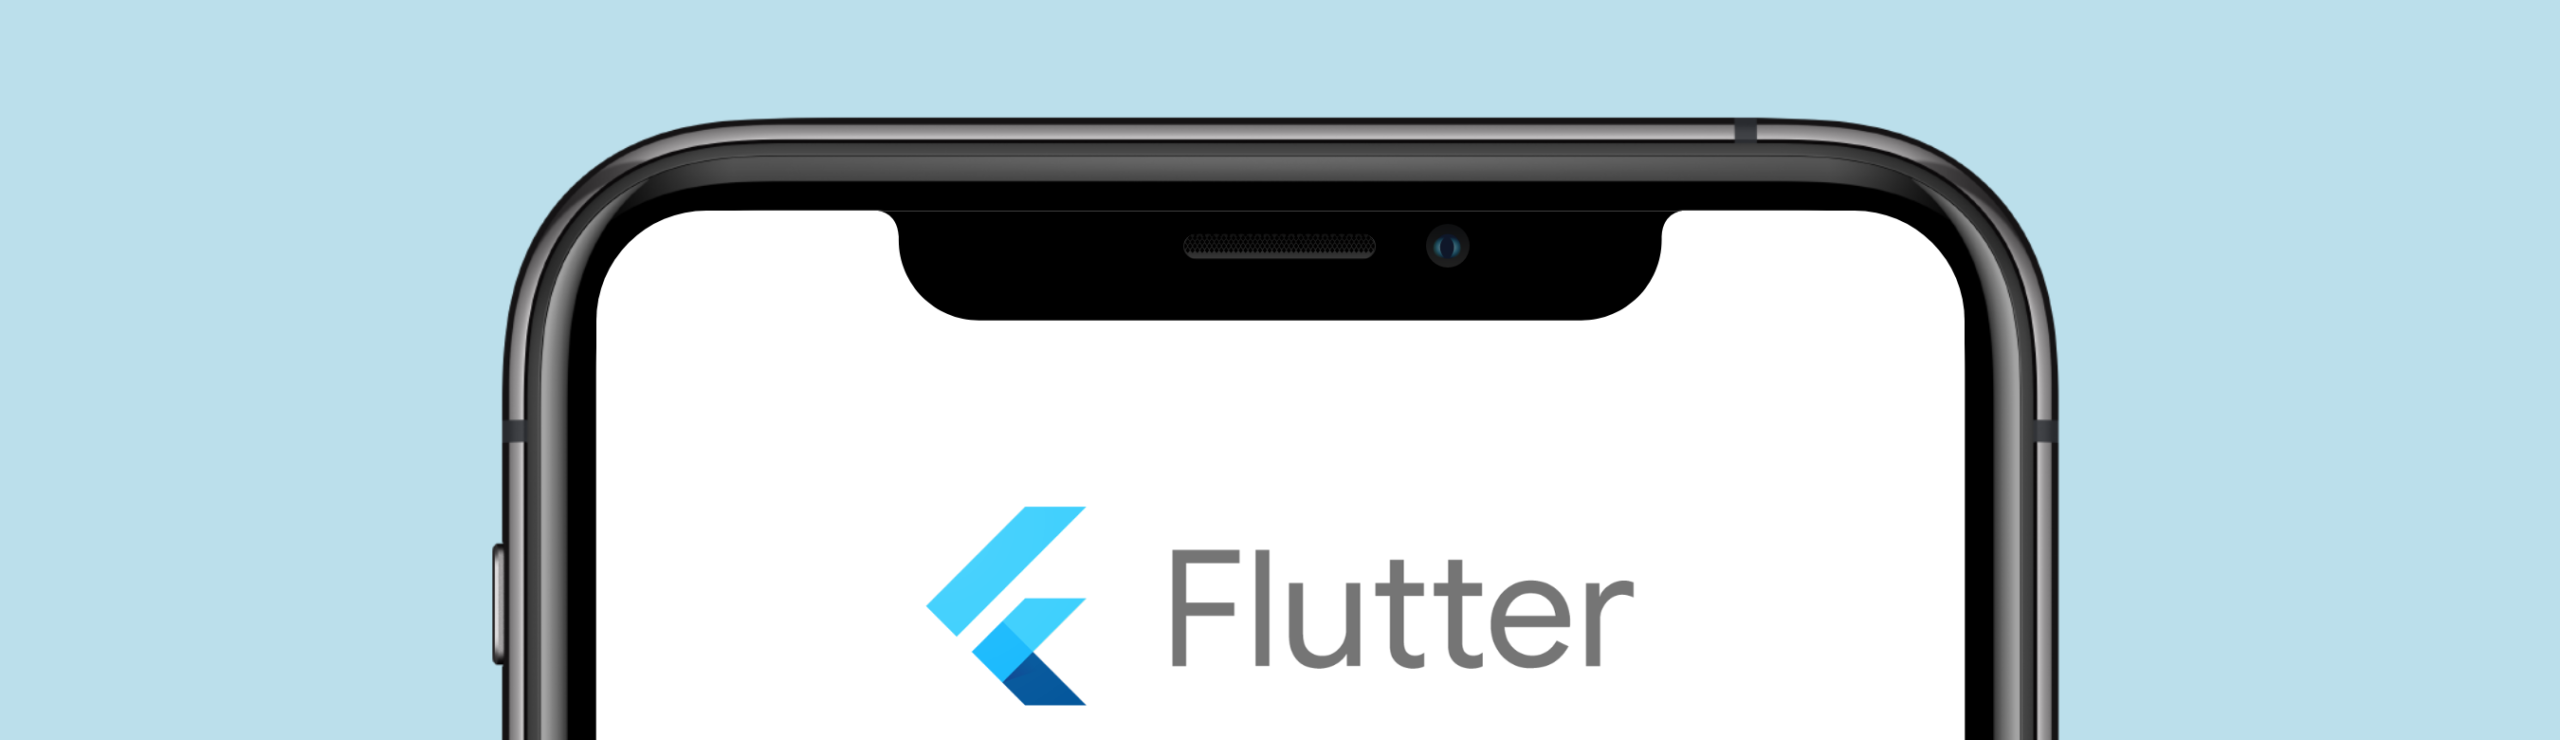 App Development with Google Flutter: Cross-platform Strategy in a Large-scale Project